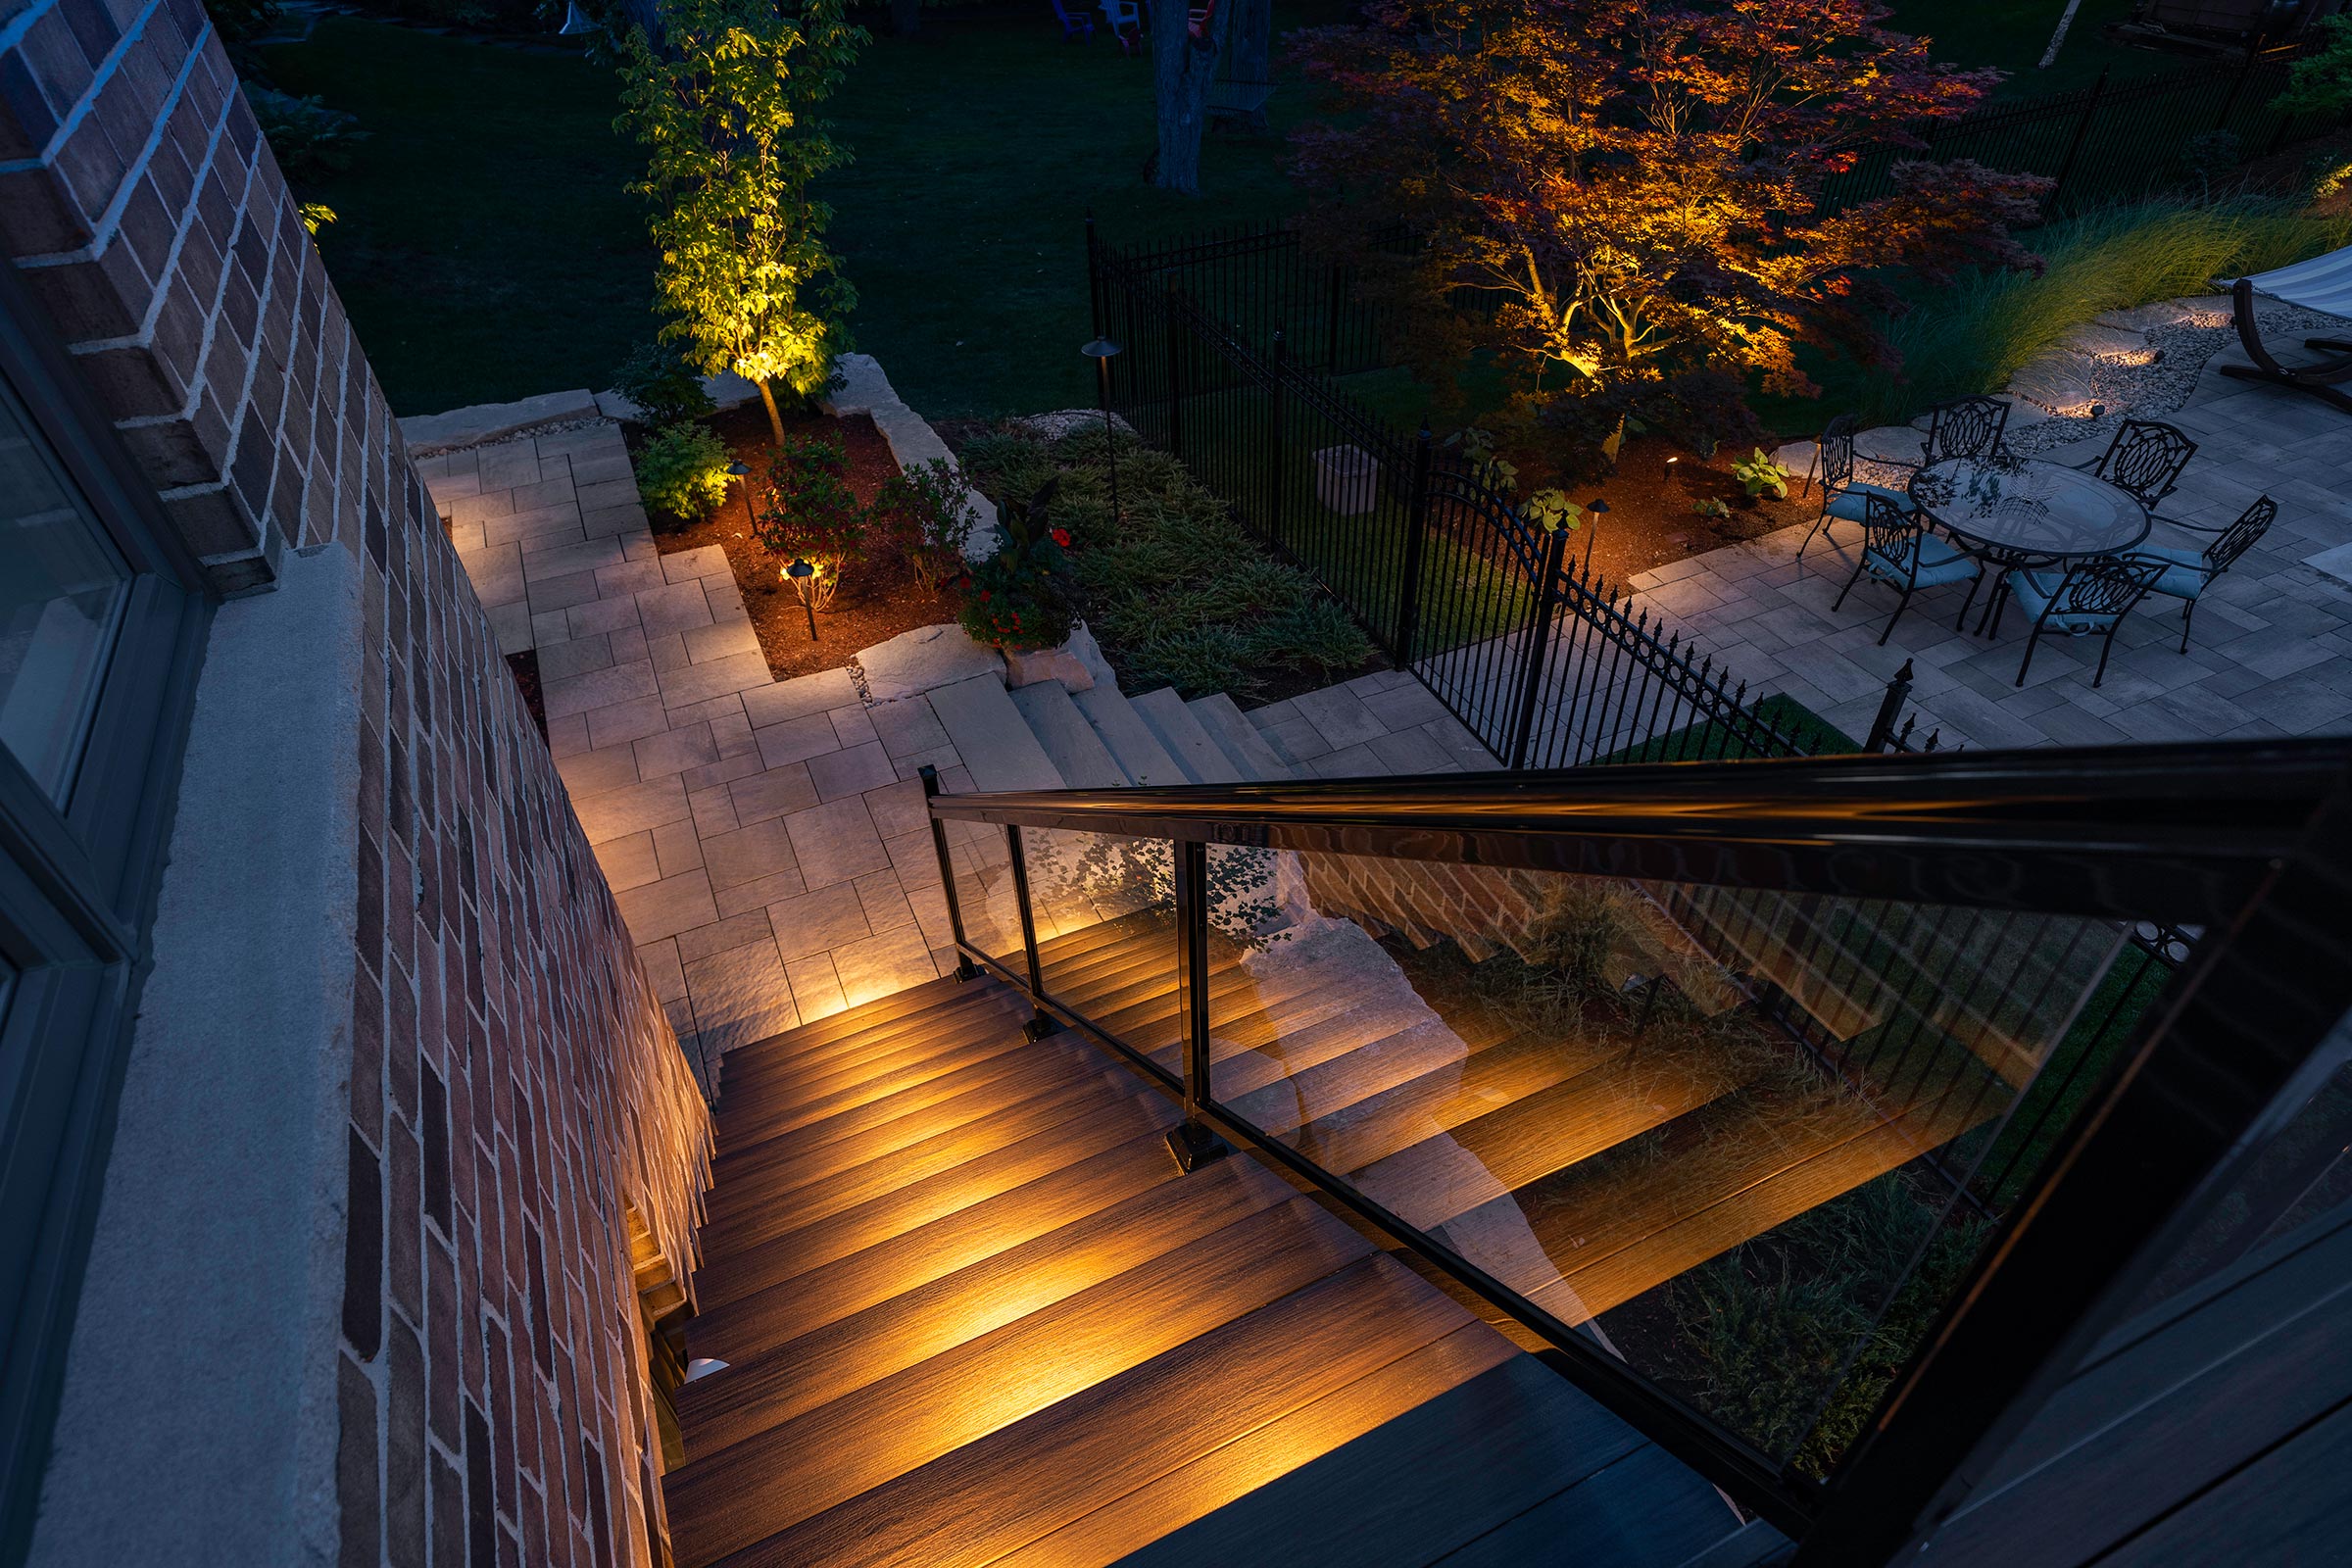 Stair lighting for extra security for your backyard pool and deck area